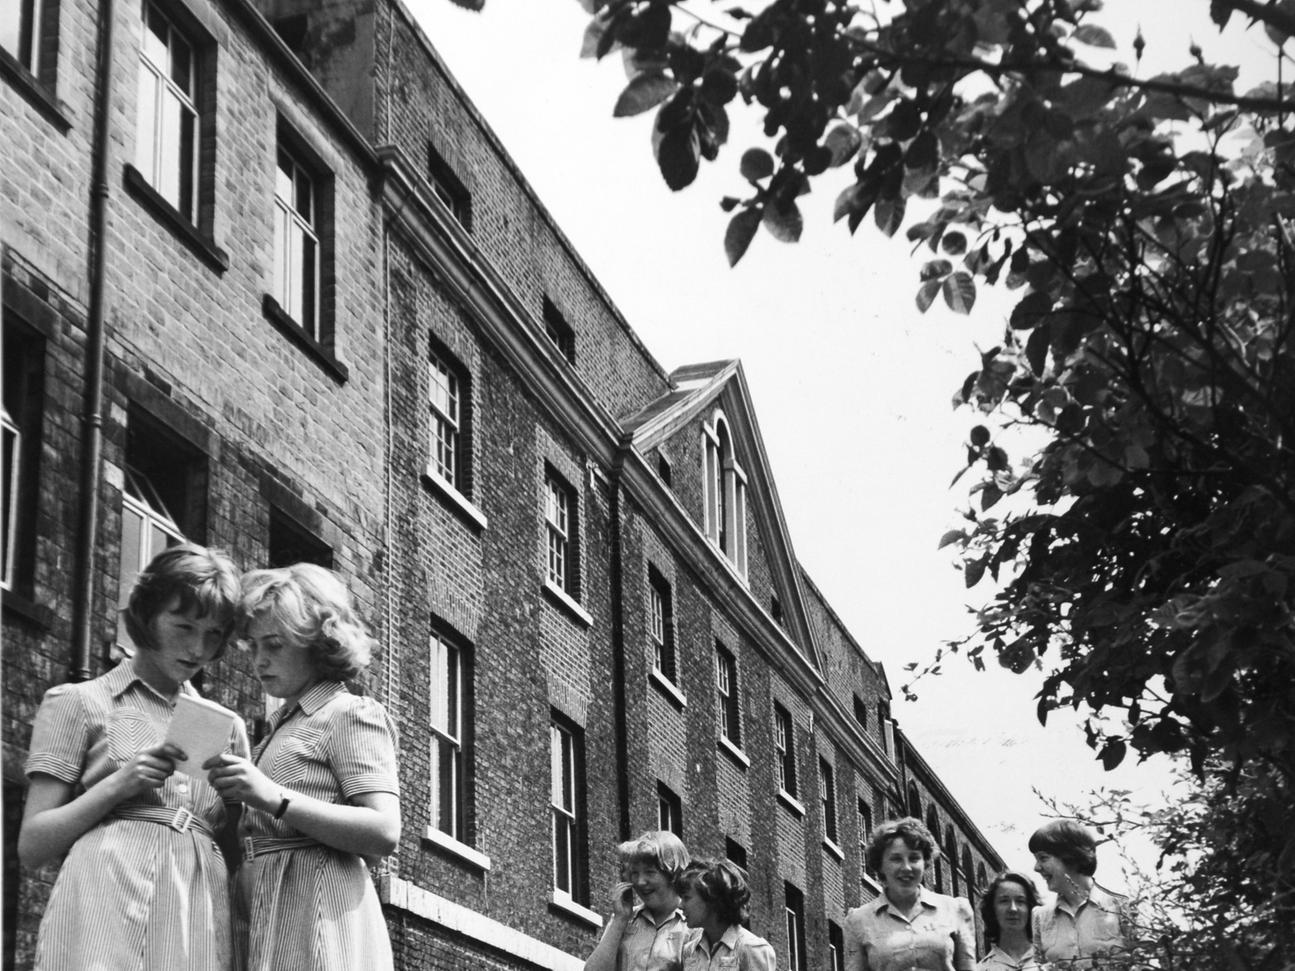 Pupils relax on the broad terrace before the handsome Georgian frontage of Fulneck School.